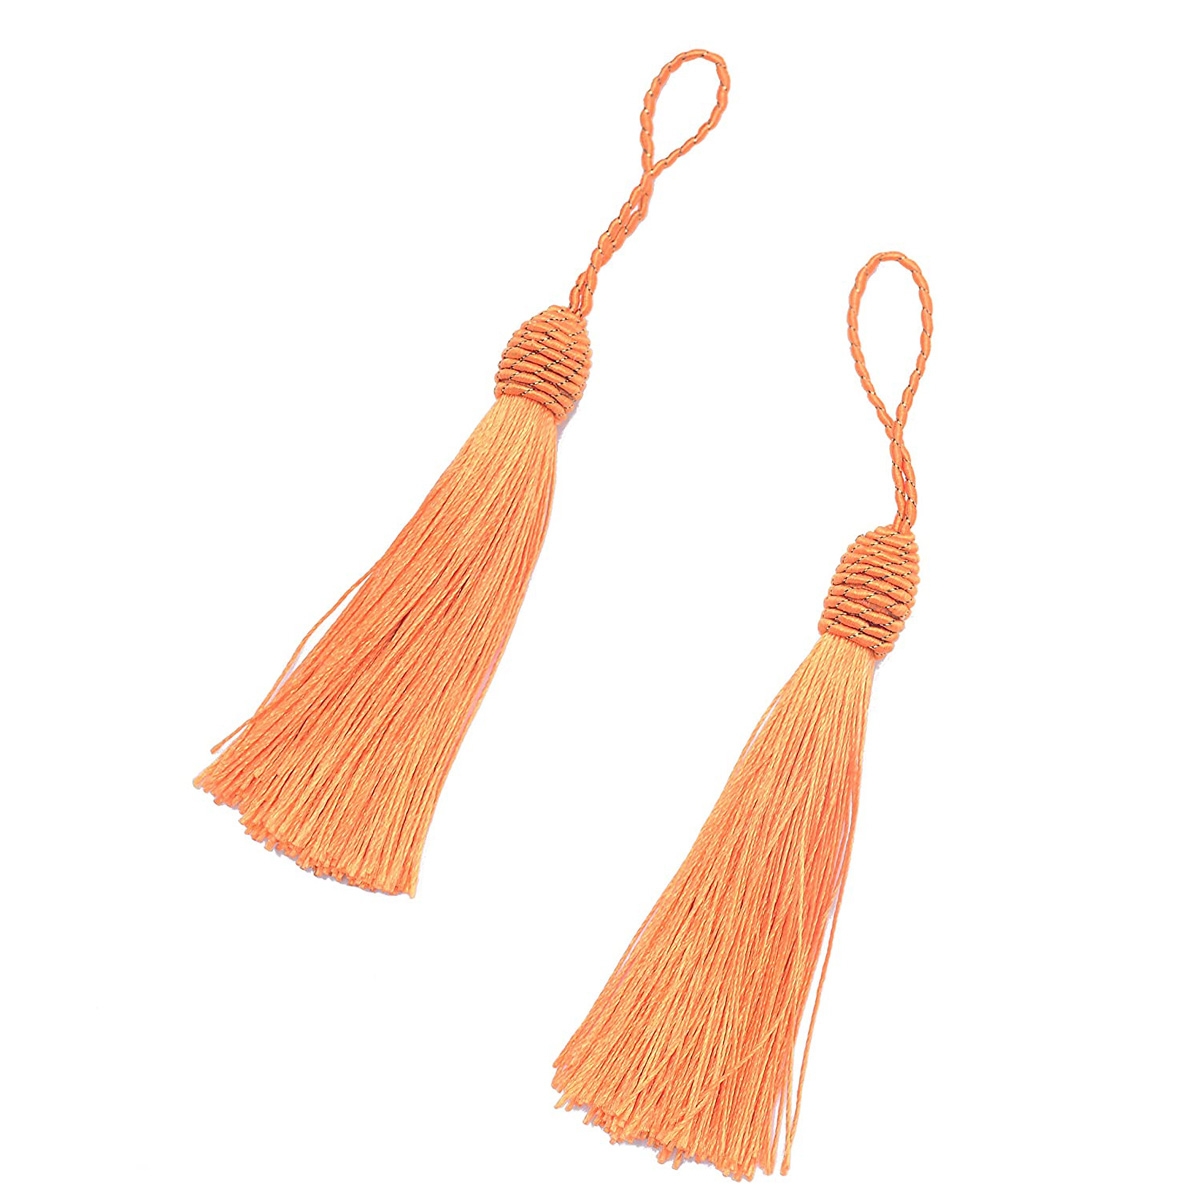 6 Inch Silky Floss Bookmark Tassels with 2-Inch Cord Loop and Small Chinese Knot for Jewelry